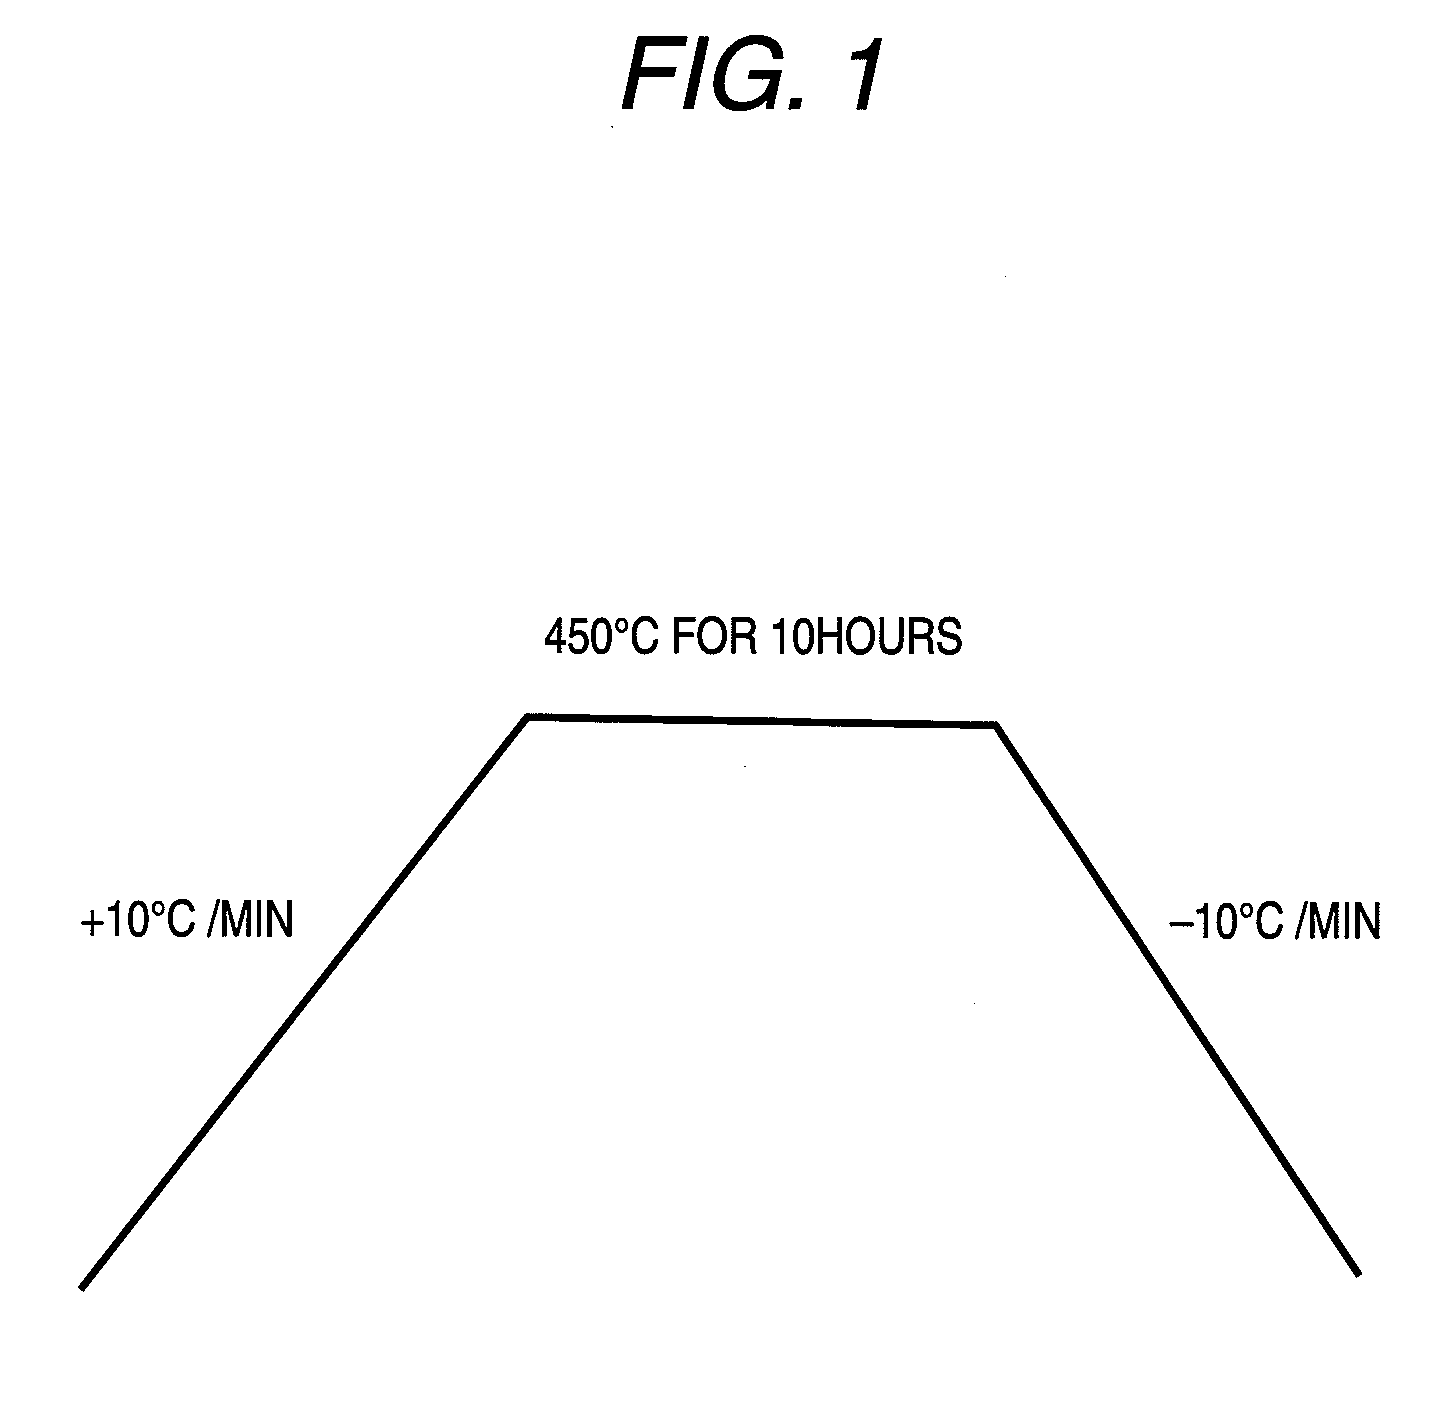 Process for producing glass substrate and glass substrate